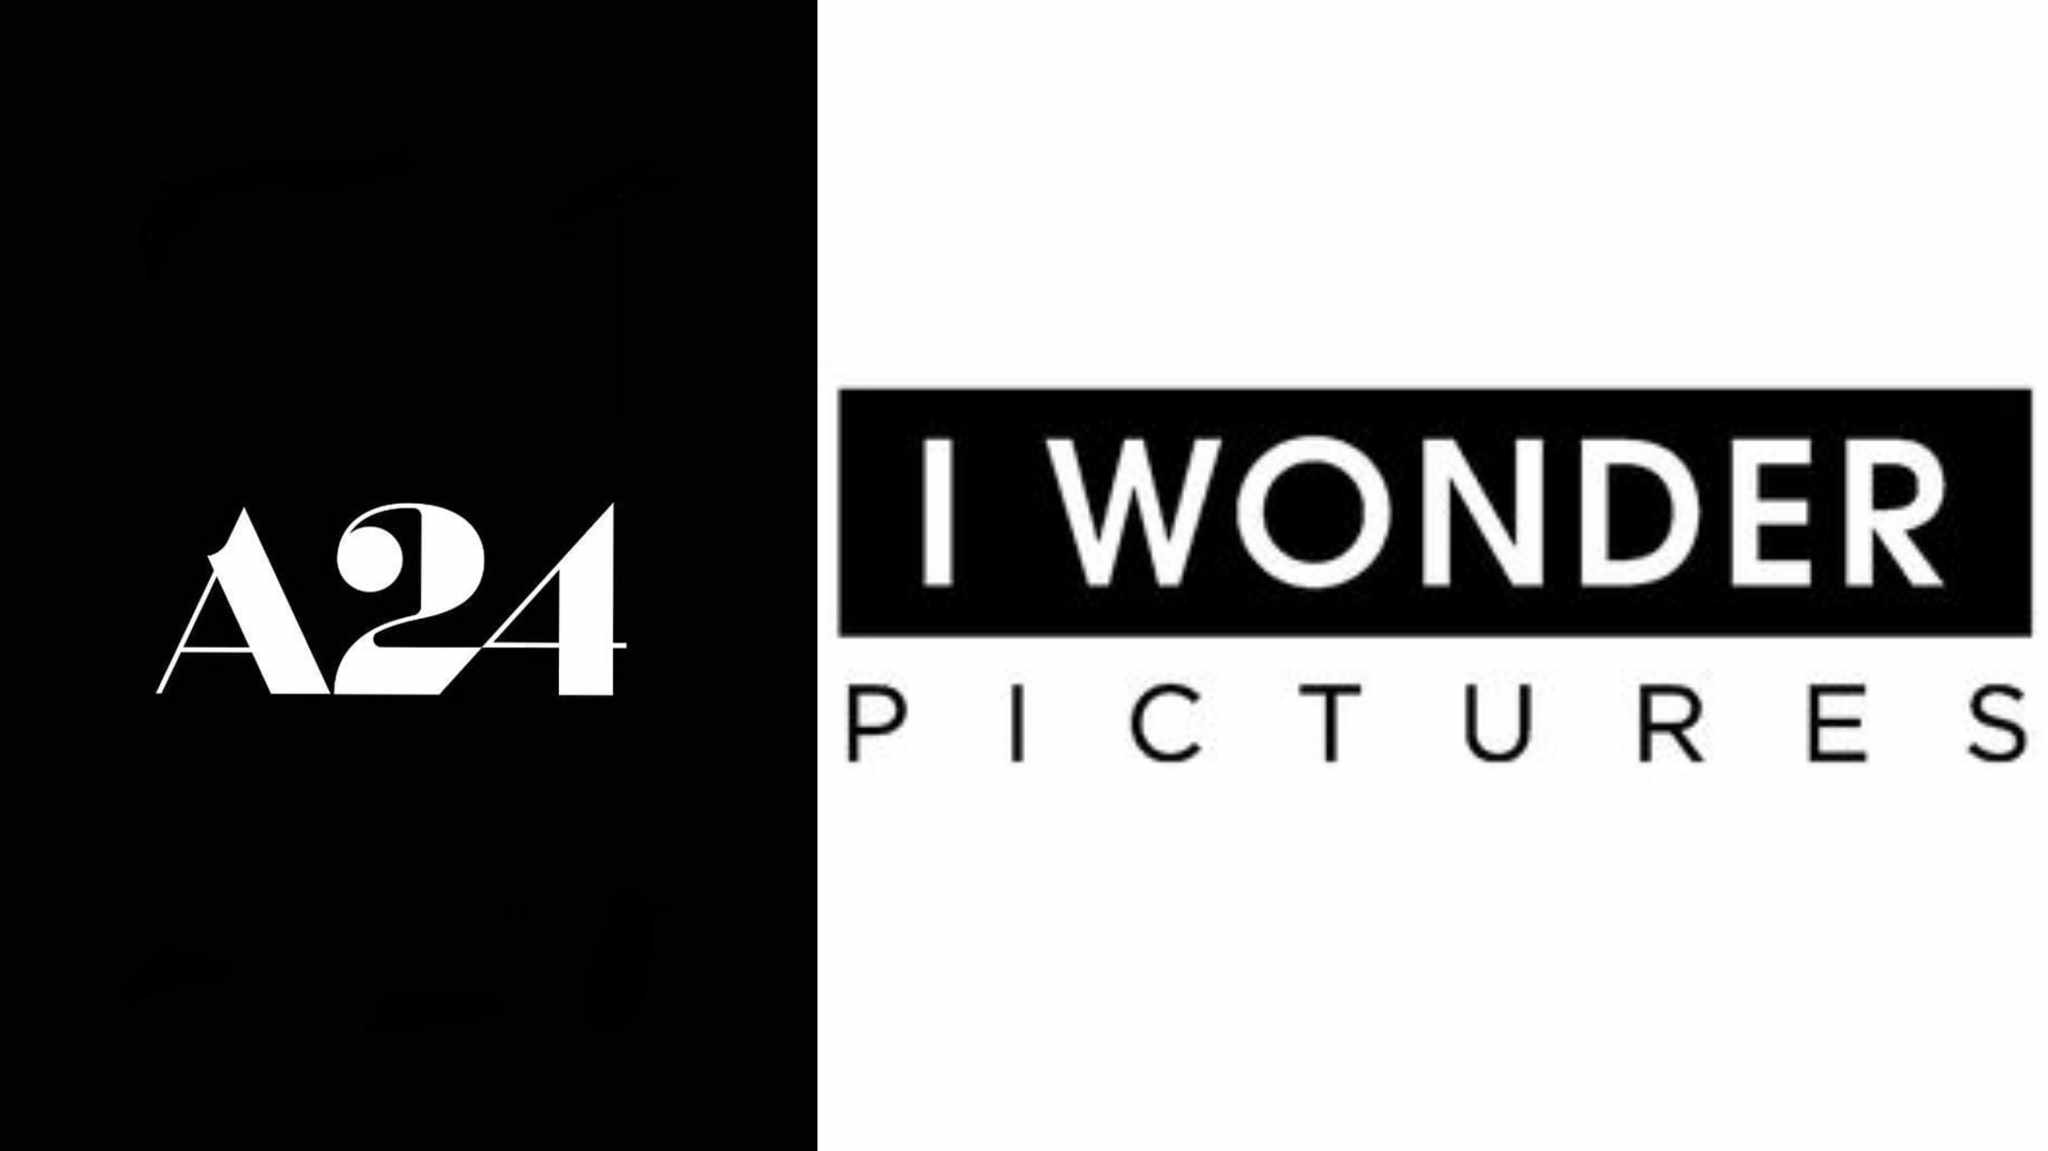 a24 e i wonder pictures